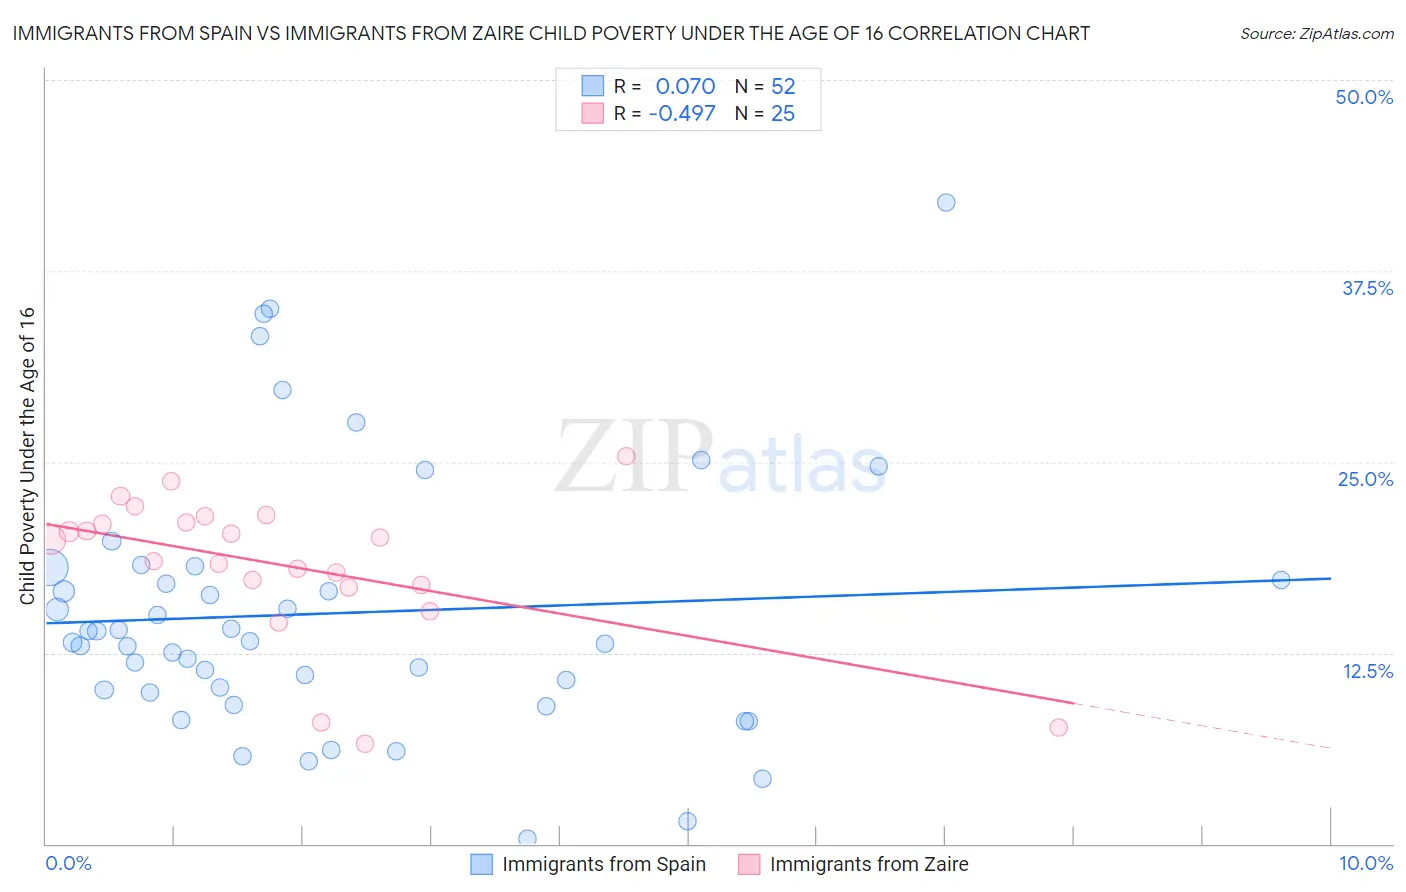 Immigrants from Spain vs Immigrants from Zaire Child Poverty Under the Age of 16